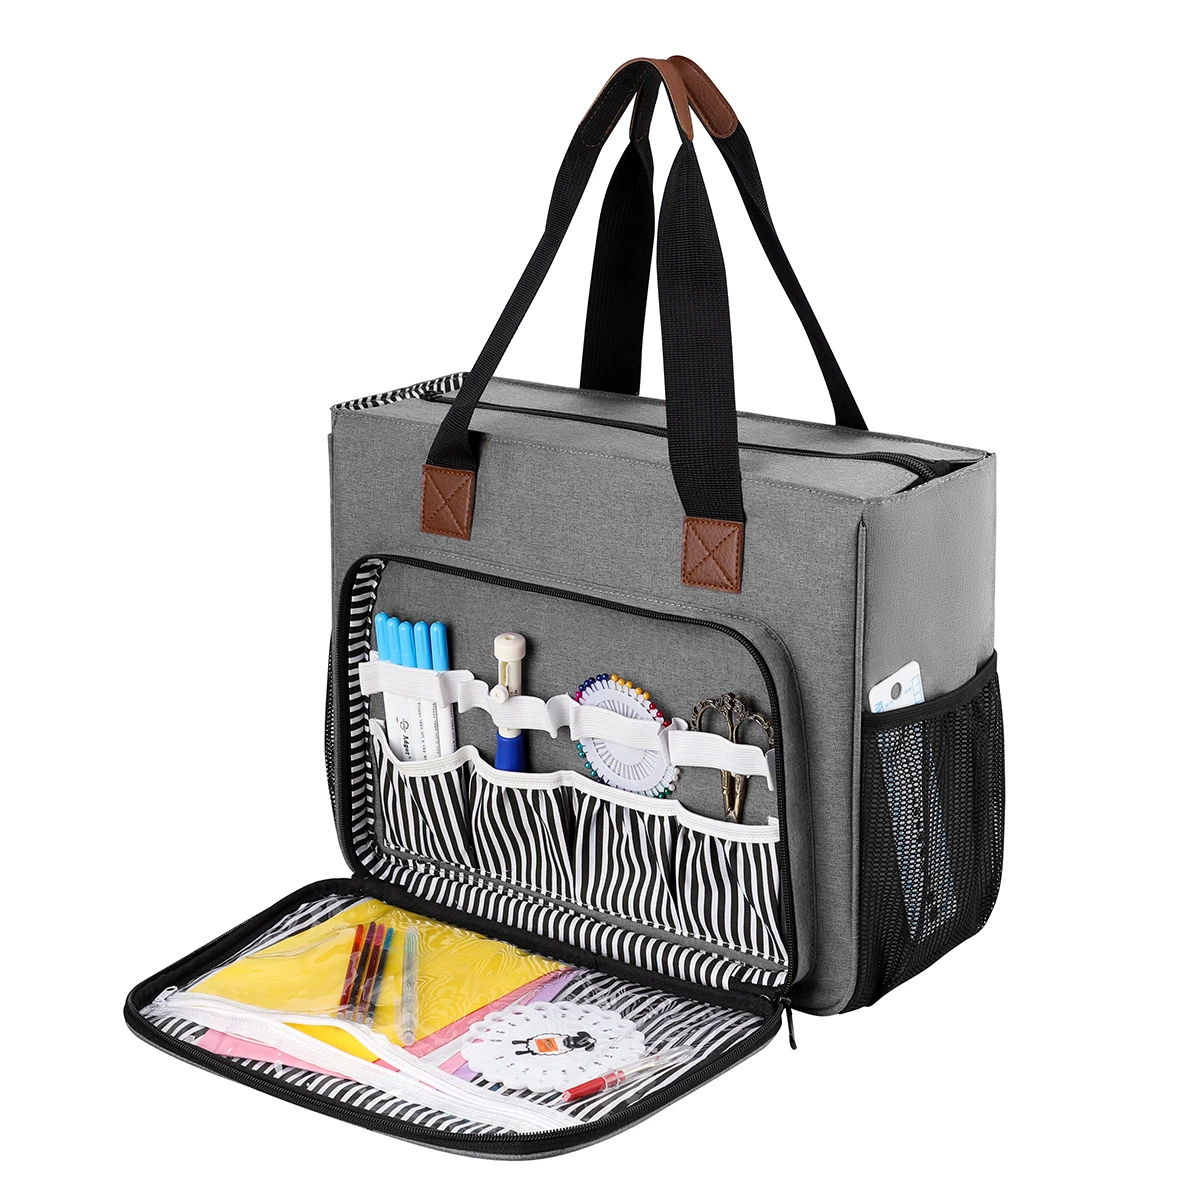 

Travel Embroidery Project Tote Bag For Embroidery Rings Floss Thread Wool Crochet Hooks Knitting Needles Yarn Storage Bag